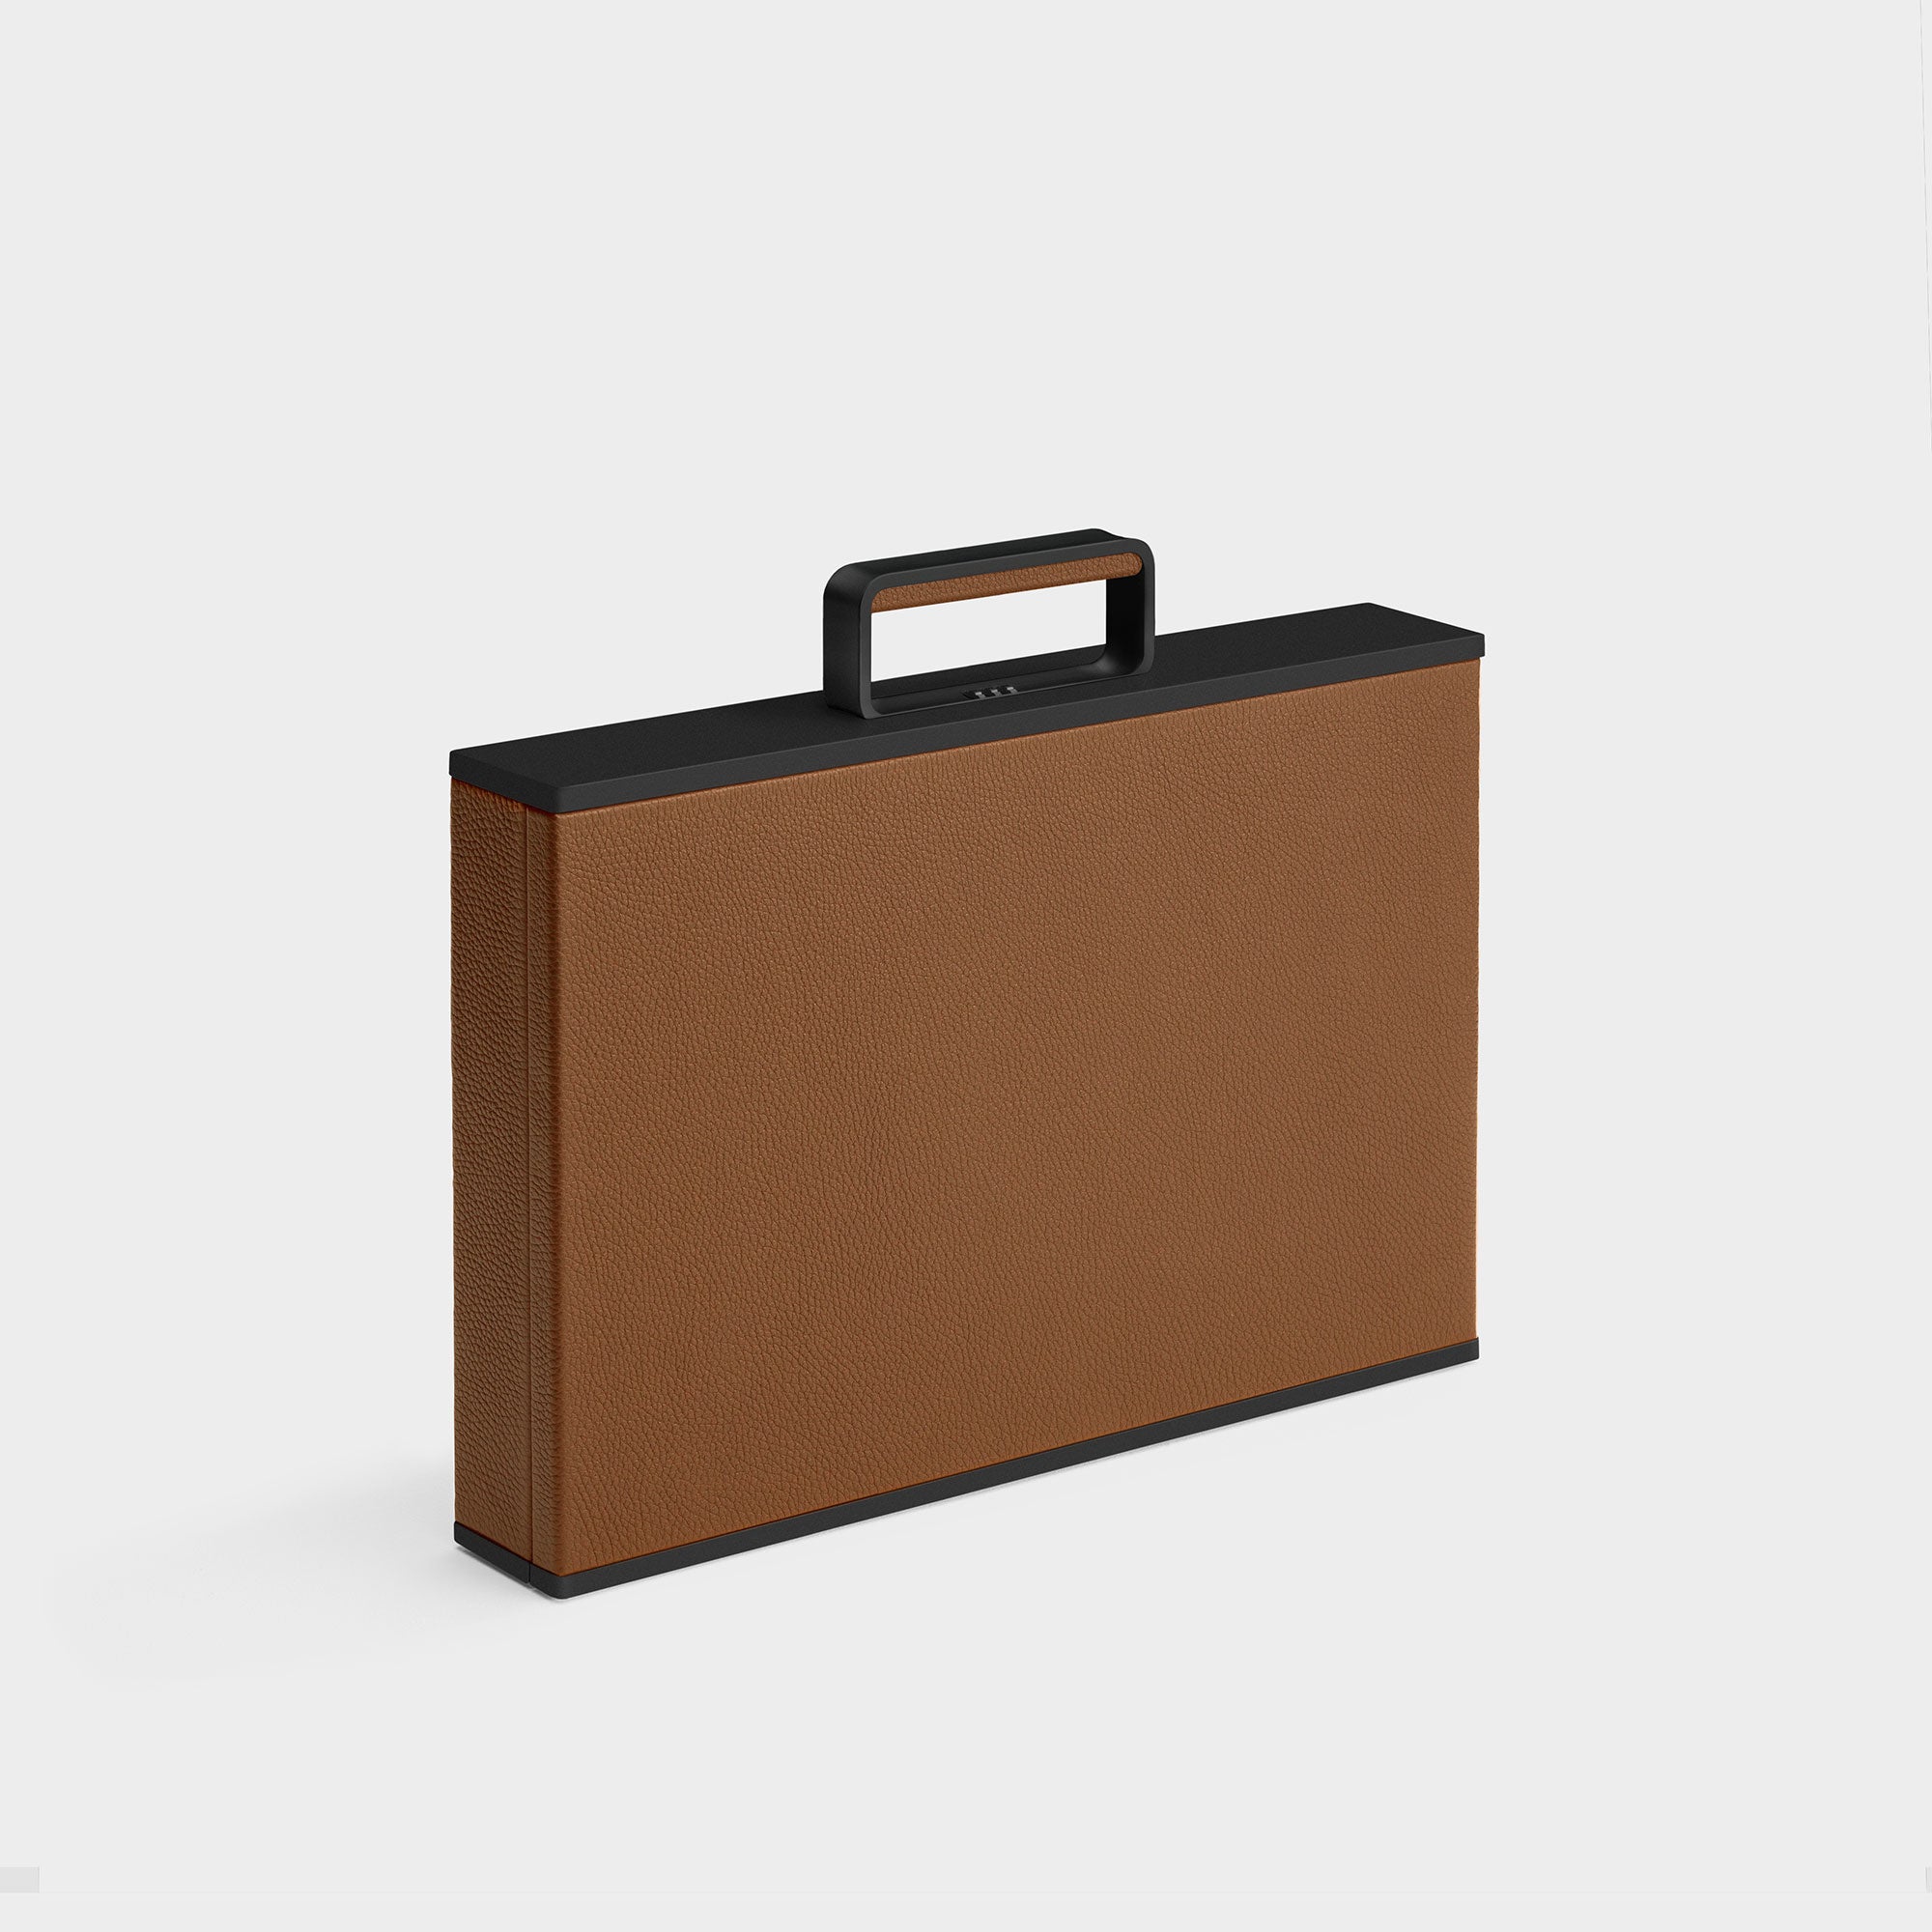 Mackenzie watch briefcase by Charles Simon in tan fine French leather. 